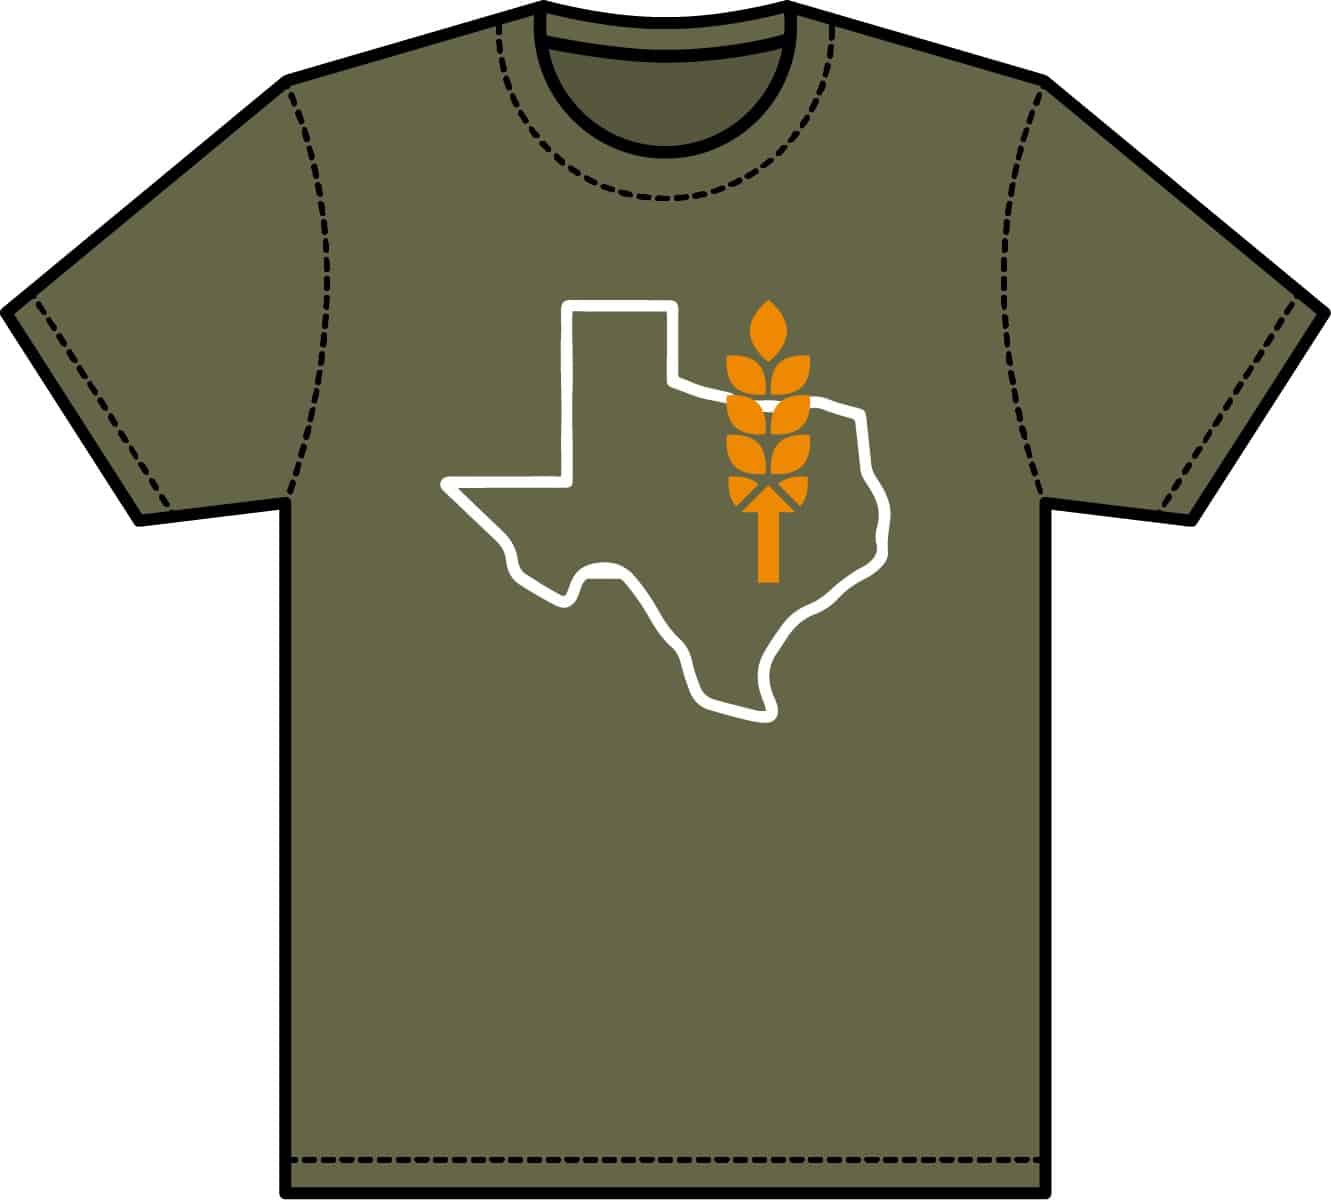 TX Outline with Wheat T-Shirt Front